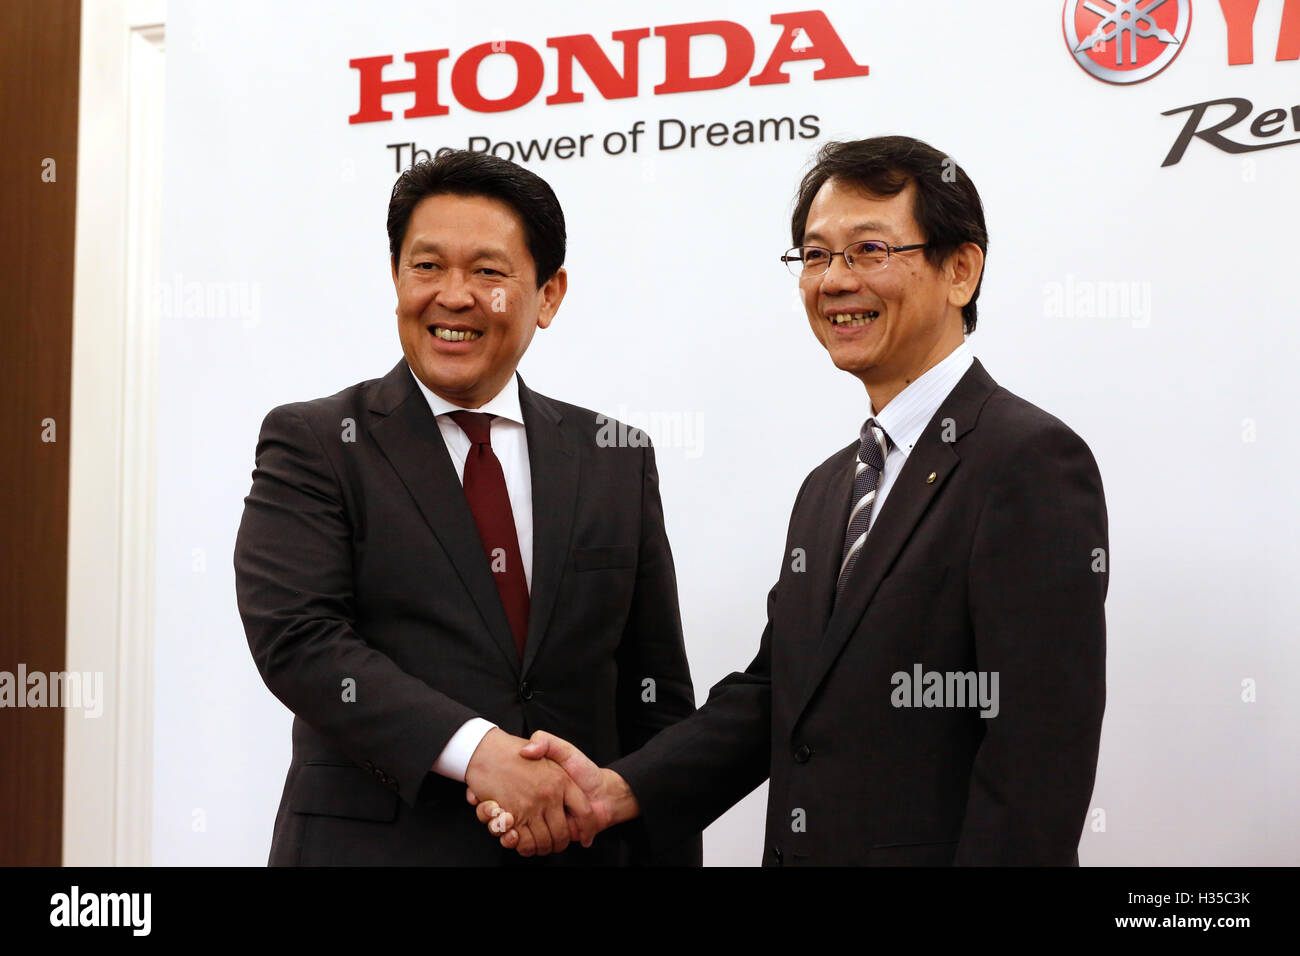 Honda Motor Operating Officer and Director Shinji Aoyama, left, shakes hands with Yamaha Motor Managing Executive Officer and Director Katsuaki Watanabe during a joint press conference in Tokyo, Japan on October 5, 2016. Japanese auto majors Honda and Yamaha announced they have started talks toward a business tie-up in the development and production of small scooters. © Yosuke Tanaka/AFLO/Alamy Live News Stock Photo